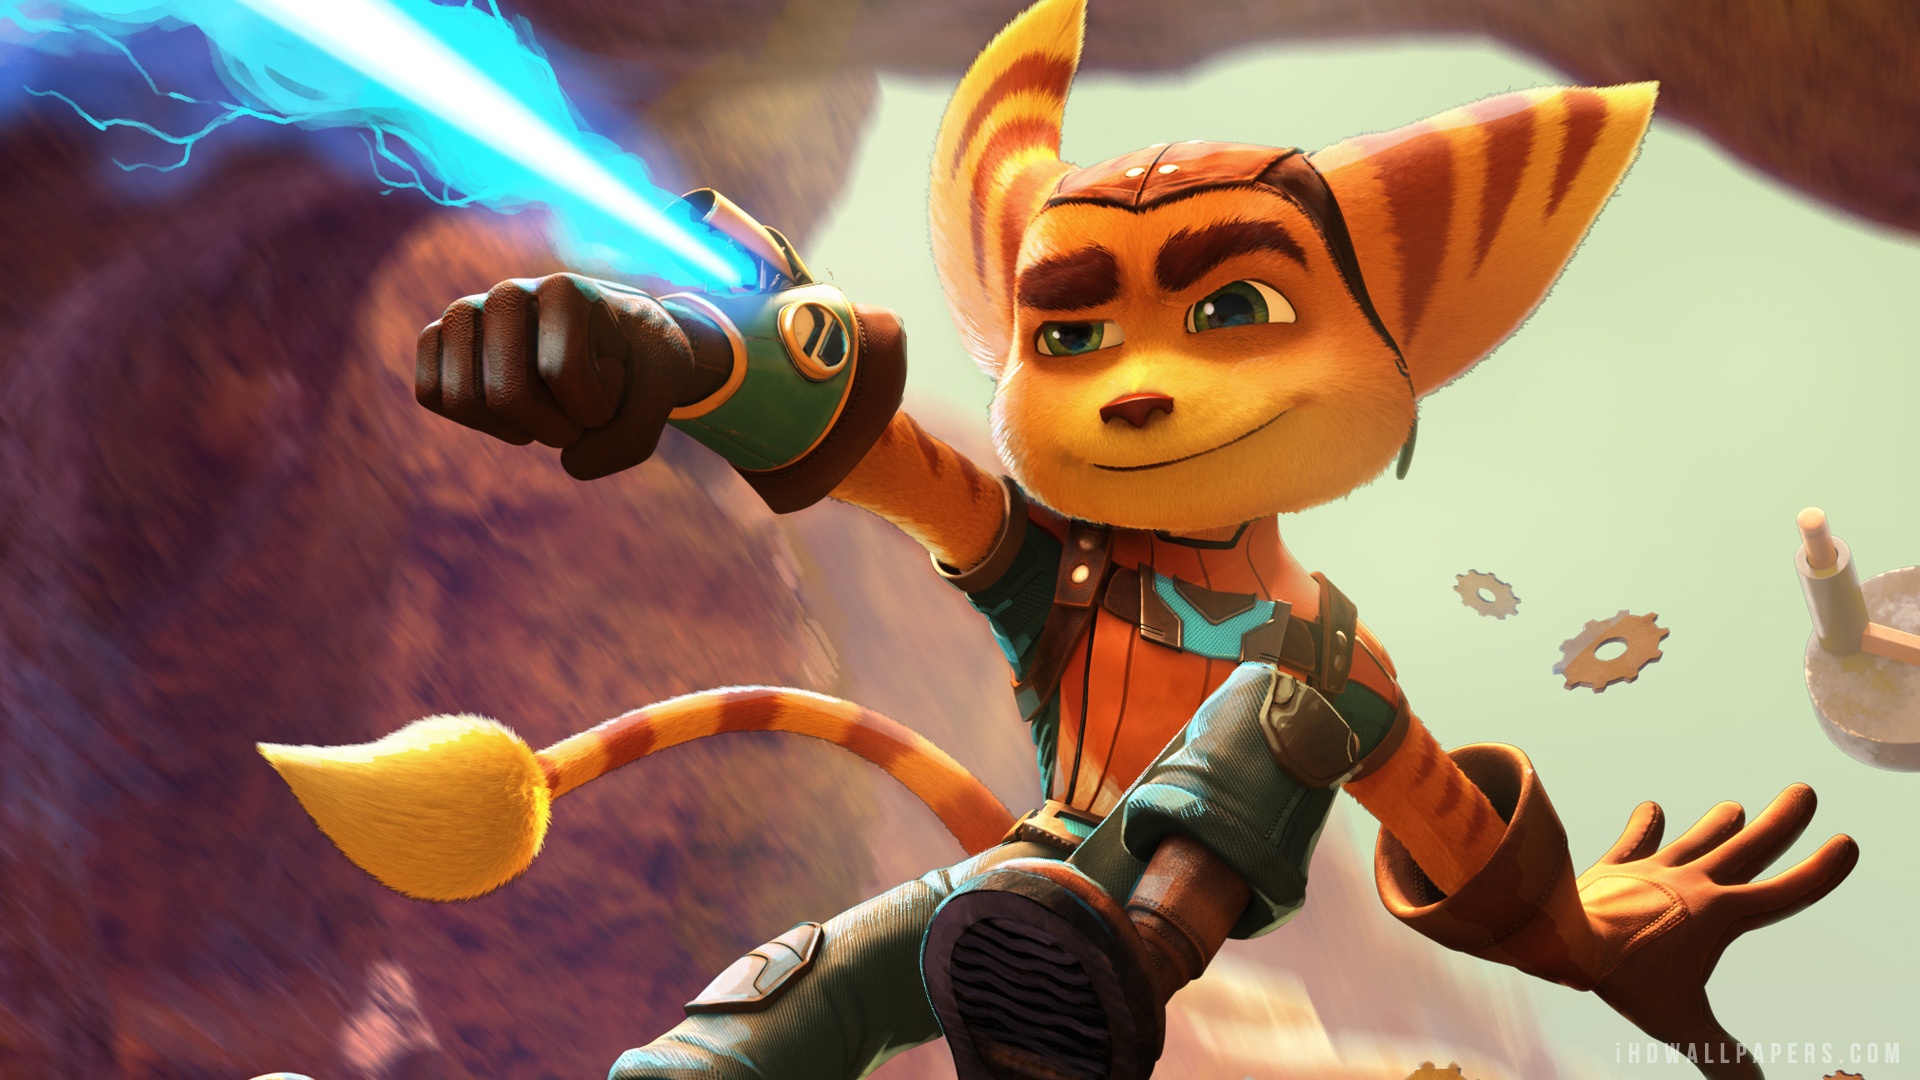 Ratchet Clank Movie 2015 HD Wallpaper   iHD Wallpapers